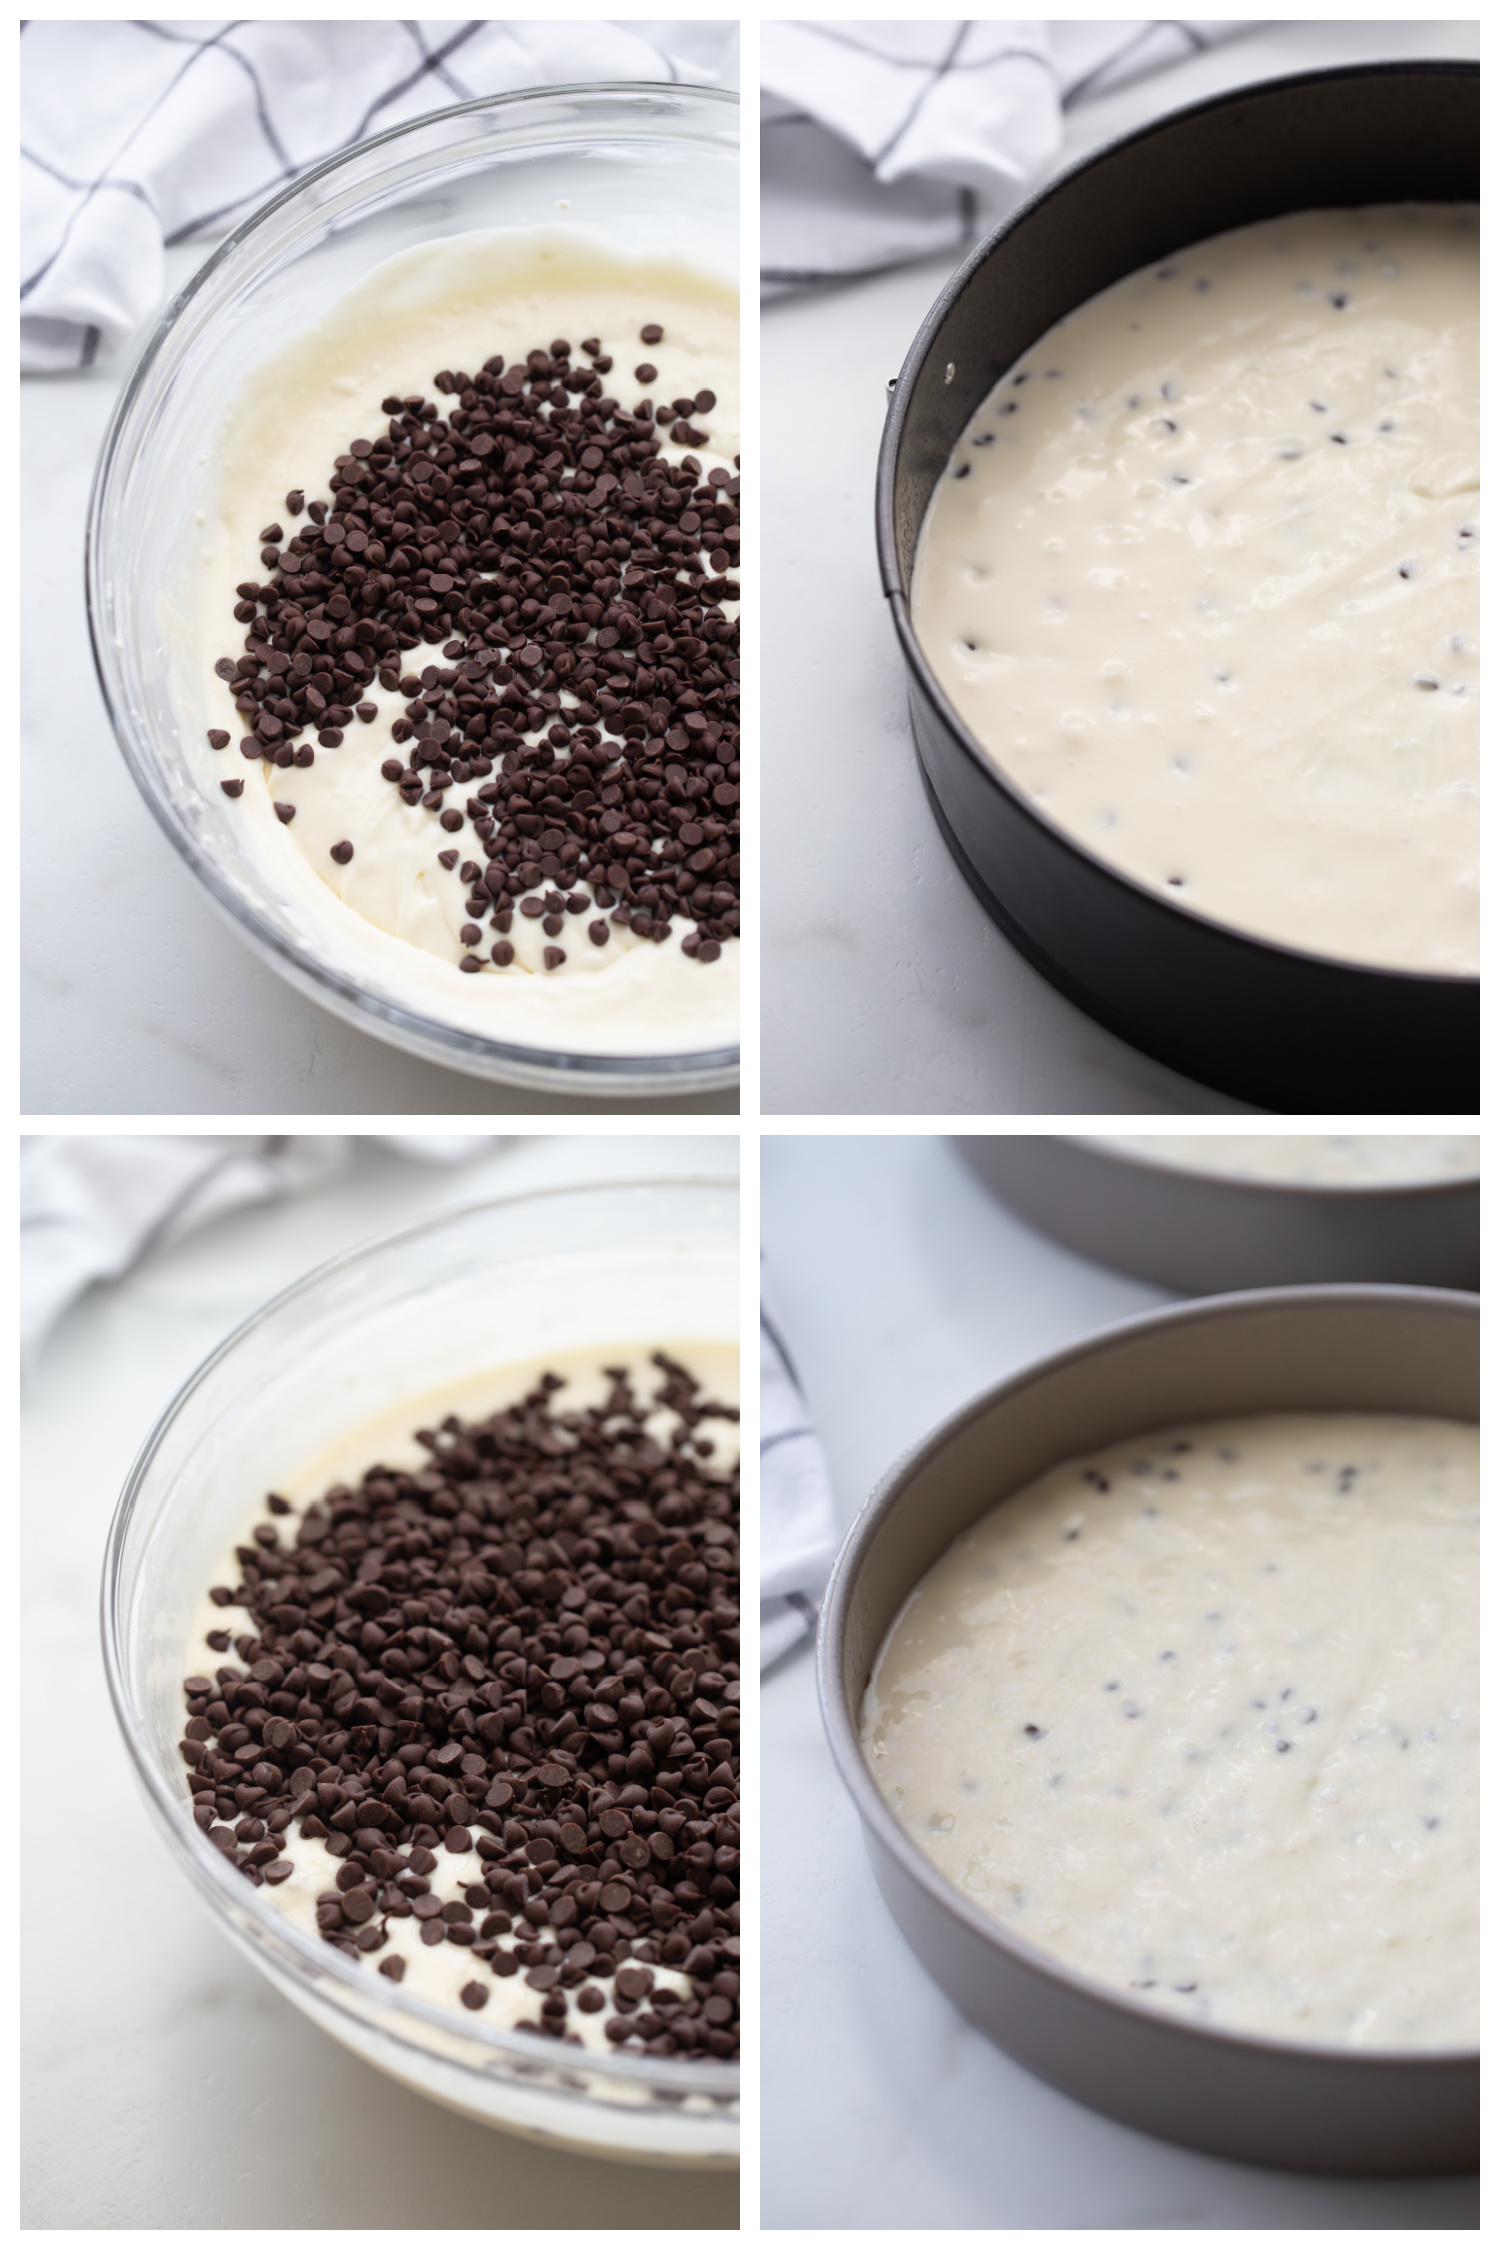 4 photos showing process of making cheesecake batter in bowl and then in springform pan and cake batter in bowl and then in pan